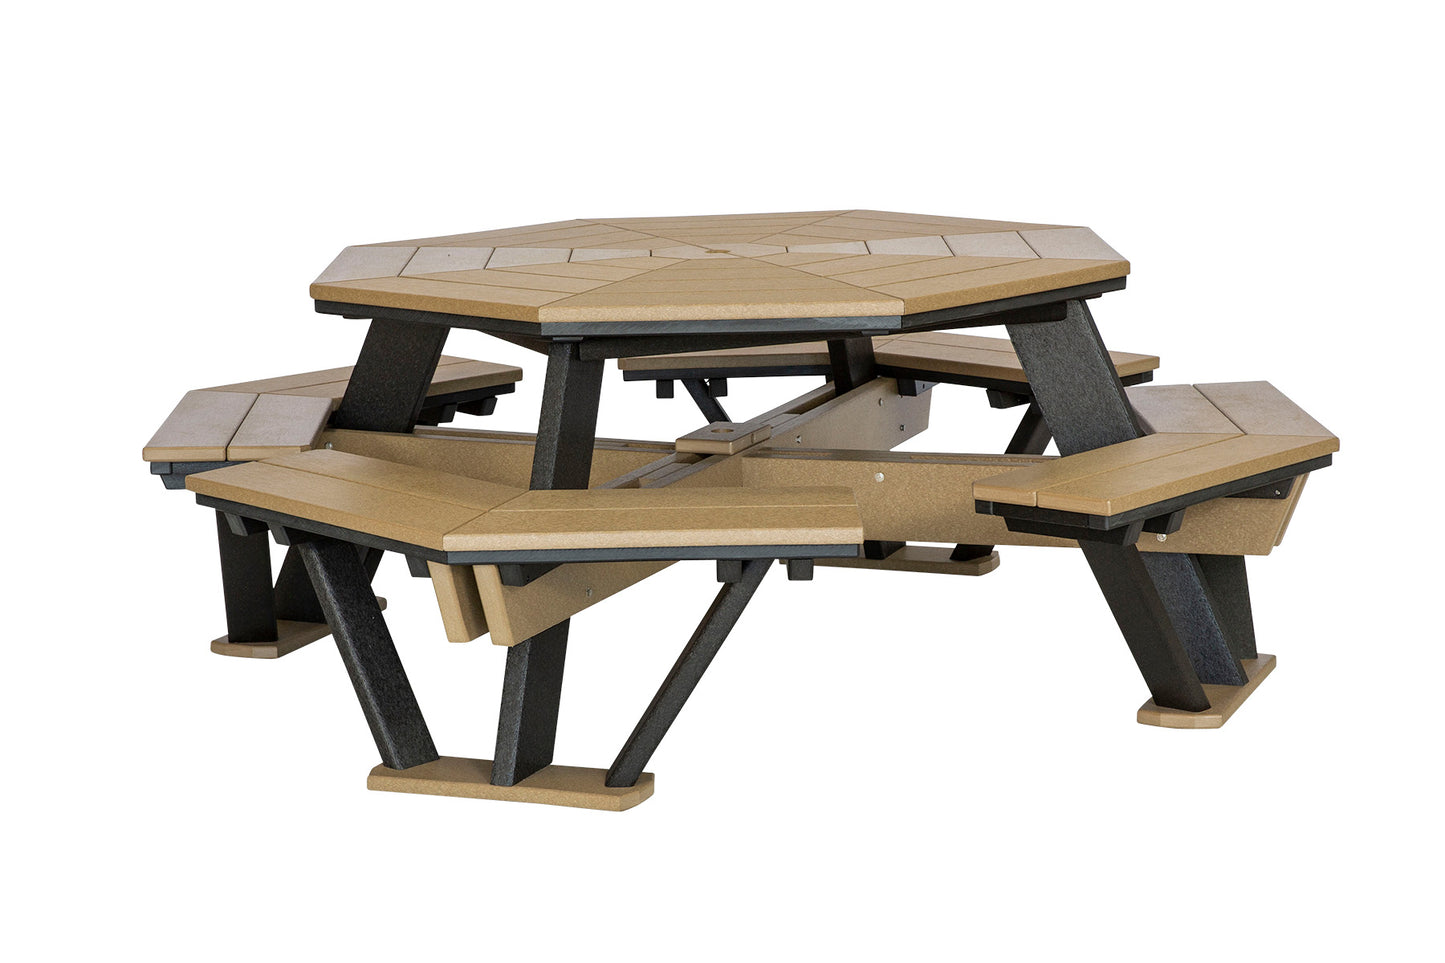 Leisure Lawns Amish Made Recycled Plastic Octagonal Picnic Table Model #879 - LEAD TIME TO SHIP 6 WEEKS OR LESS